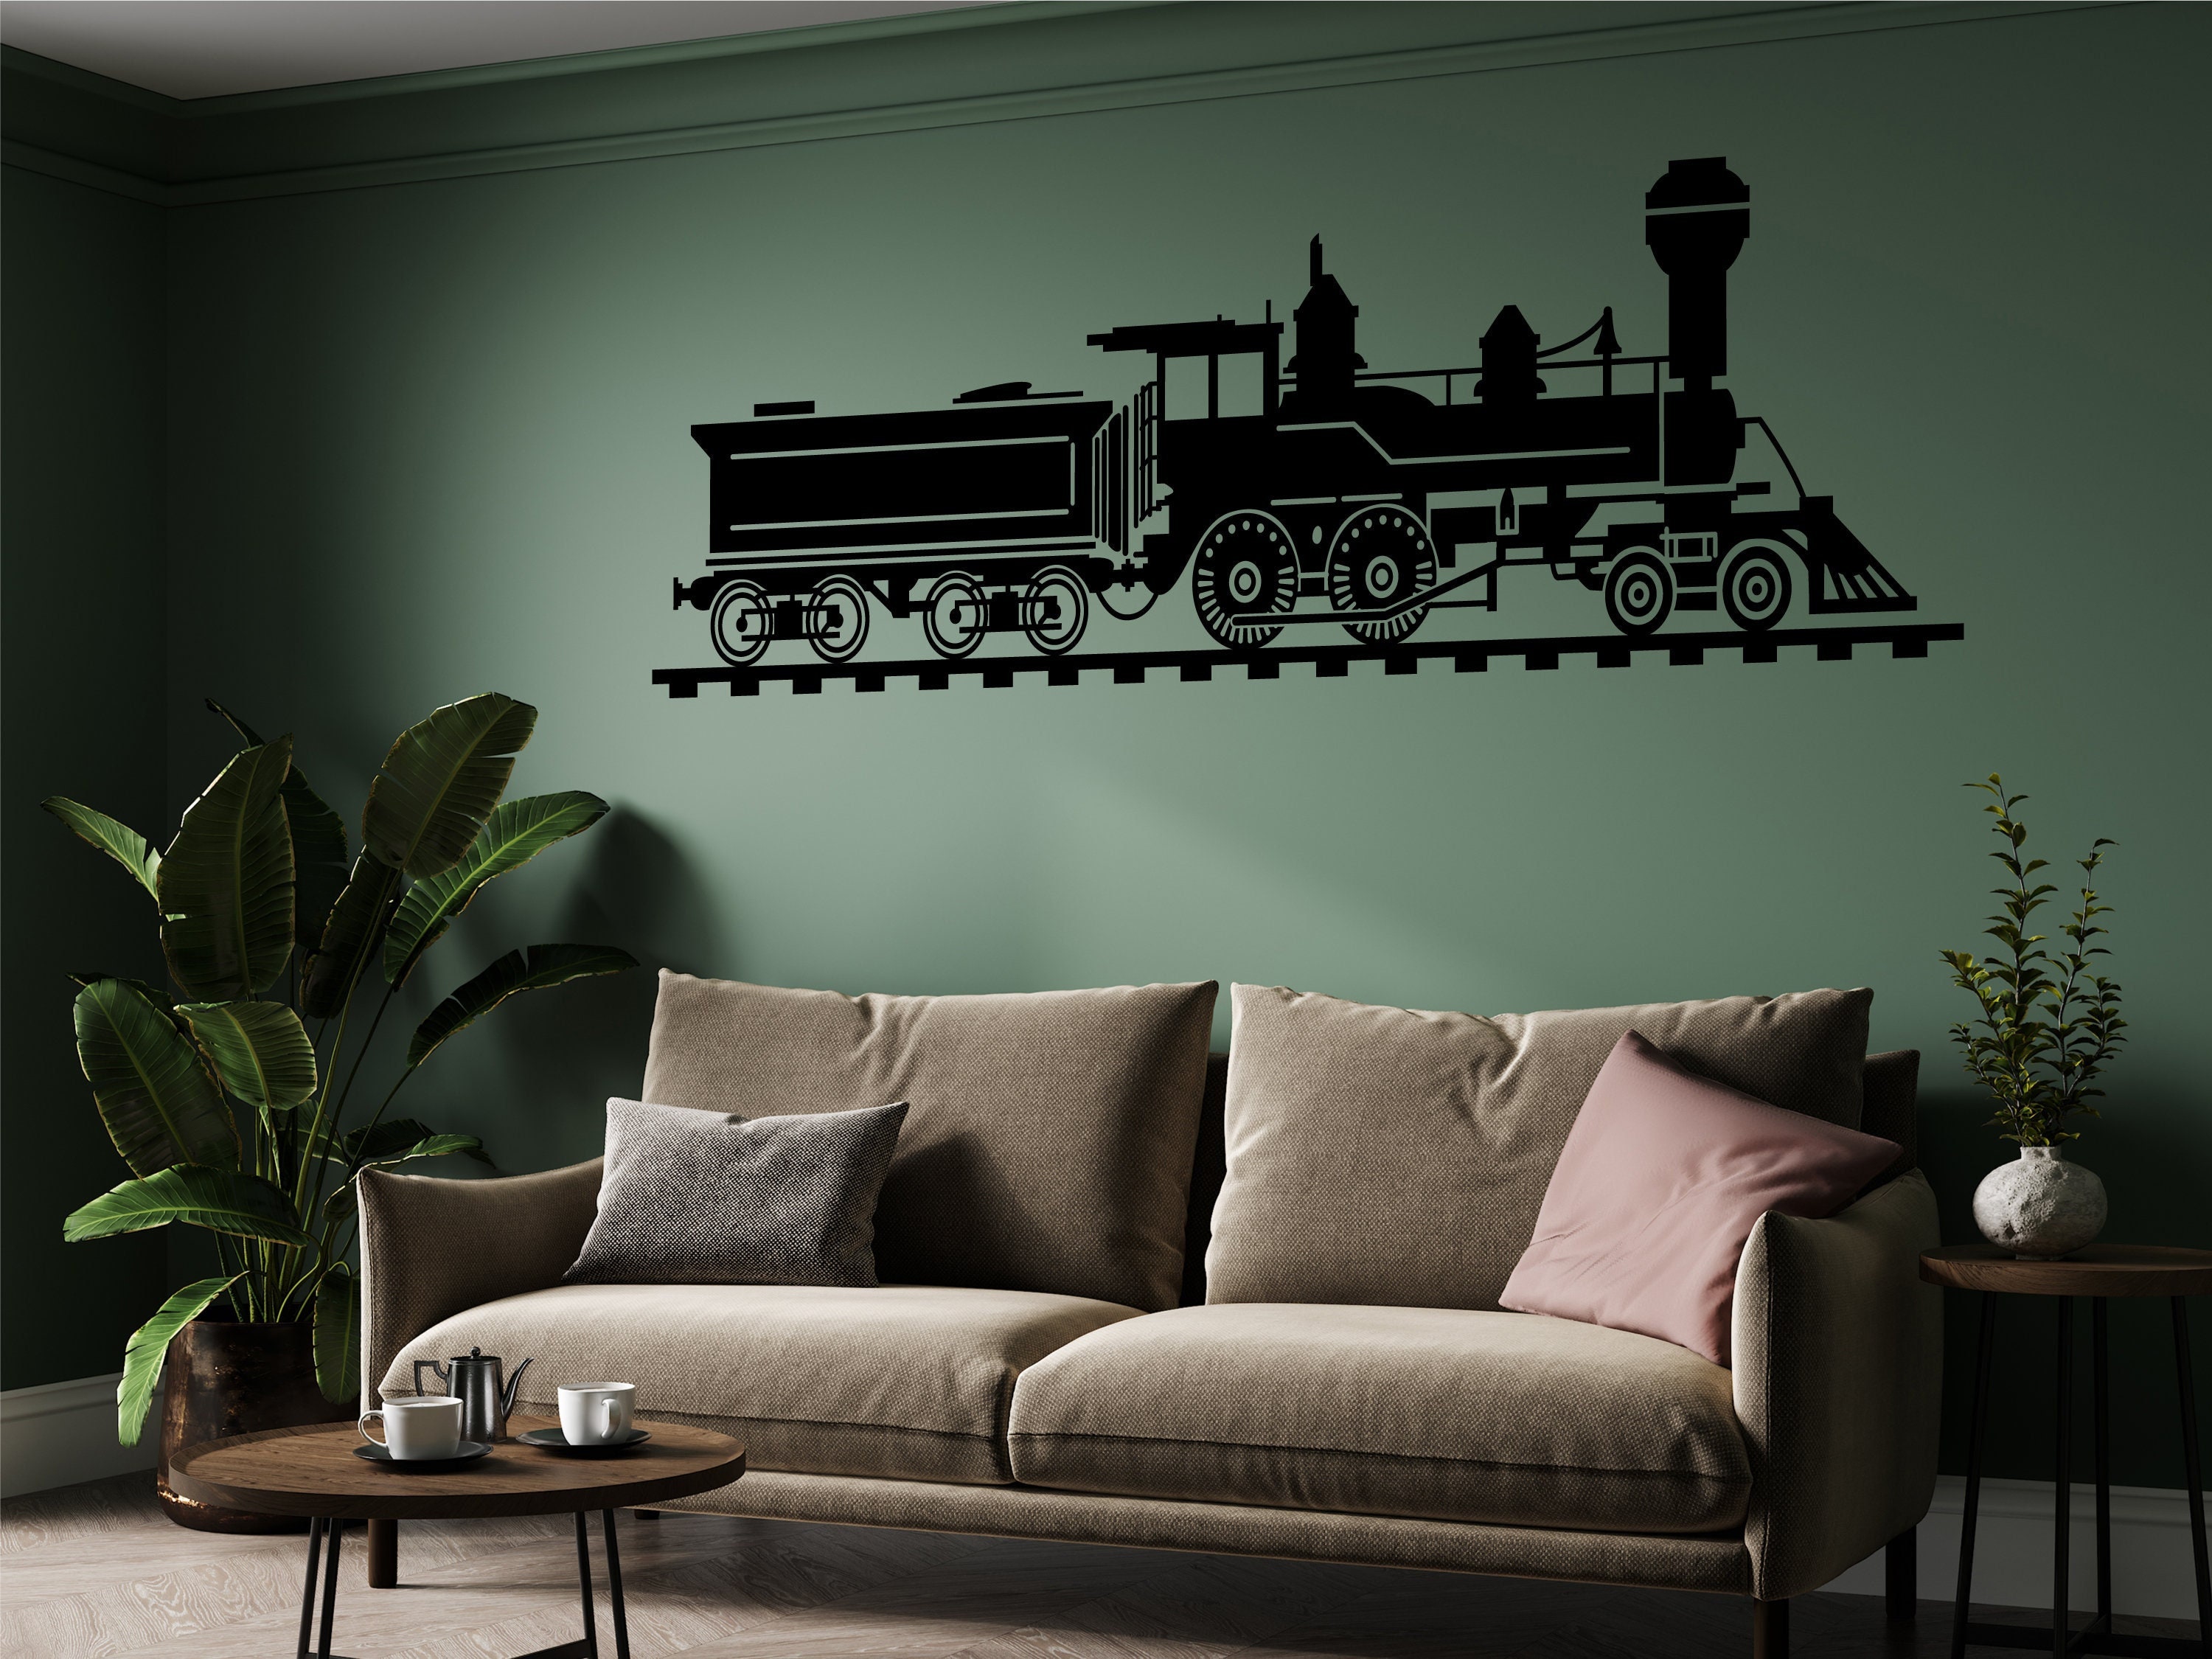 Hogwarts Express Harry Potter Wall Decal, Magic School Wall Sticker, Vinyl  Decor, Self Adhesive Removable Stickers, Peel and Stick Decor 